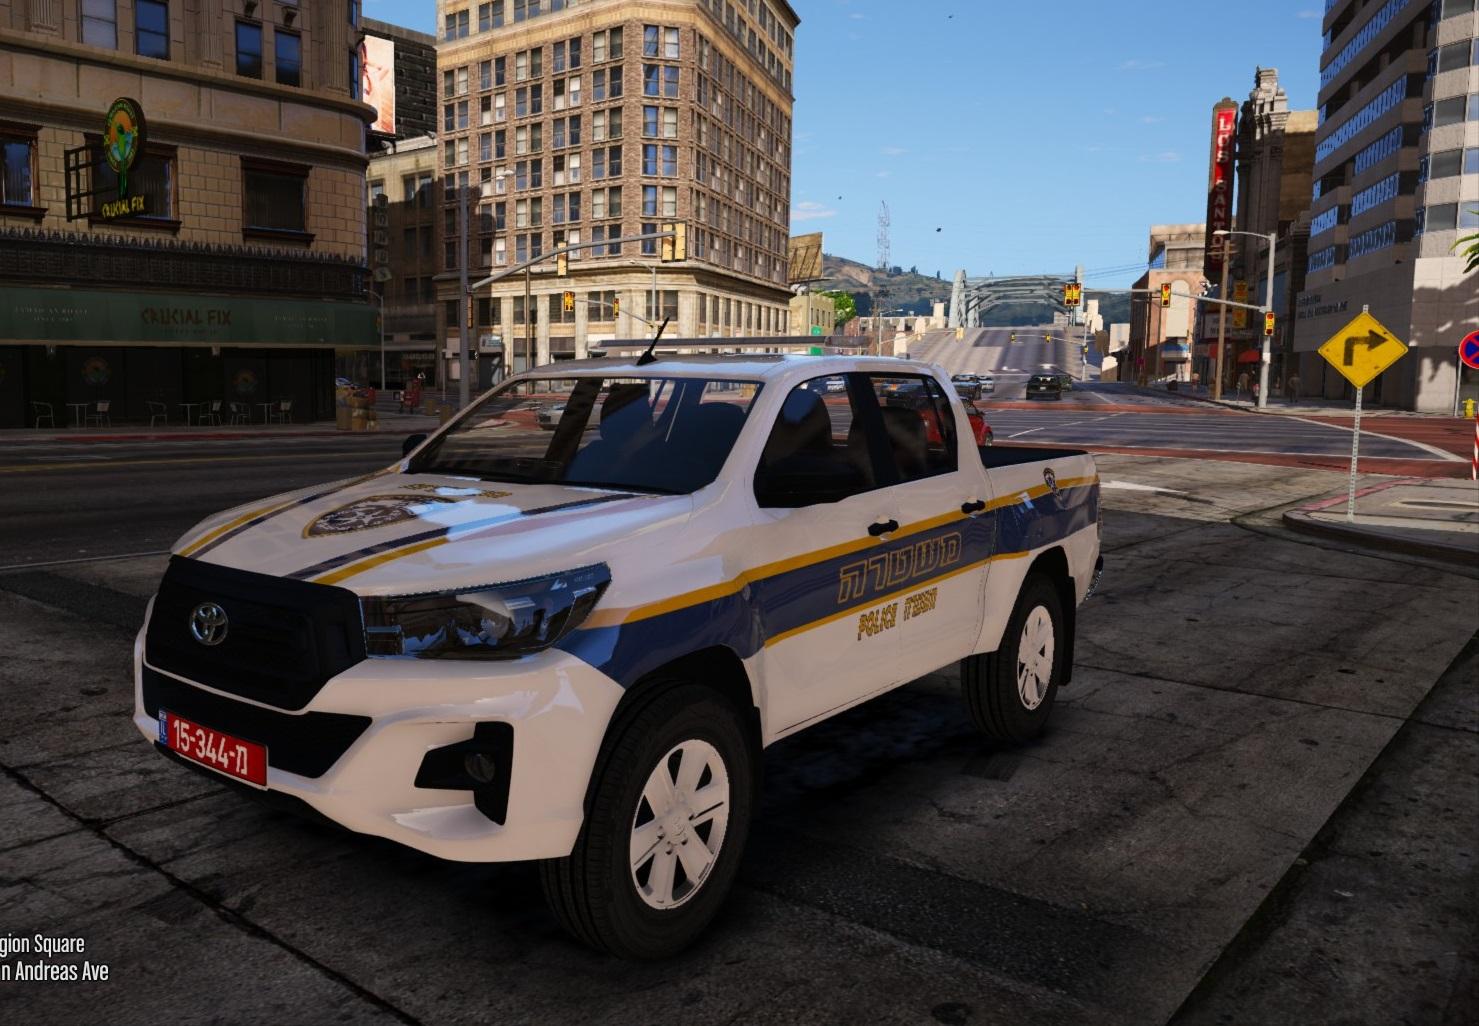 2019 toyota hilux israel police replace